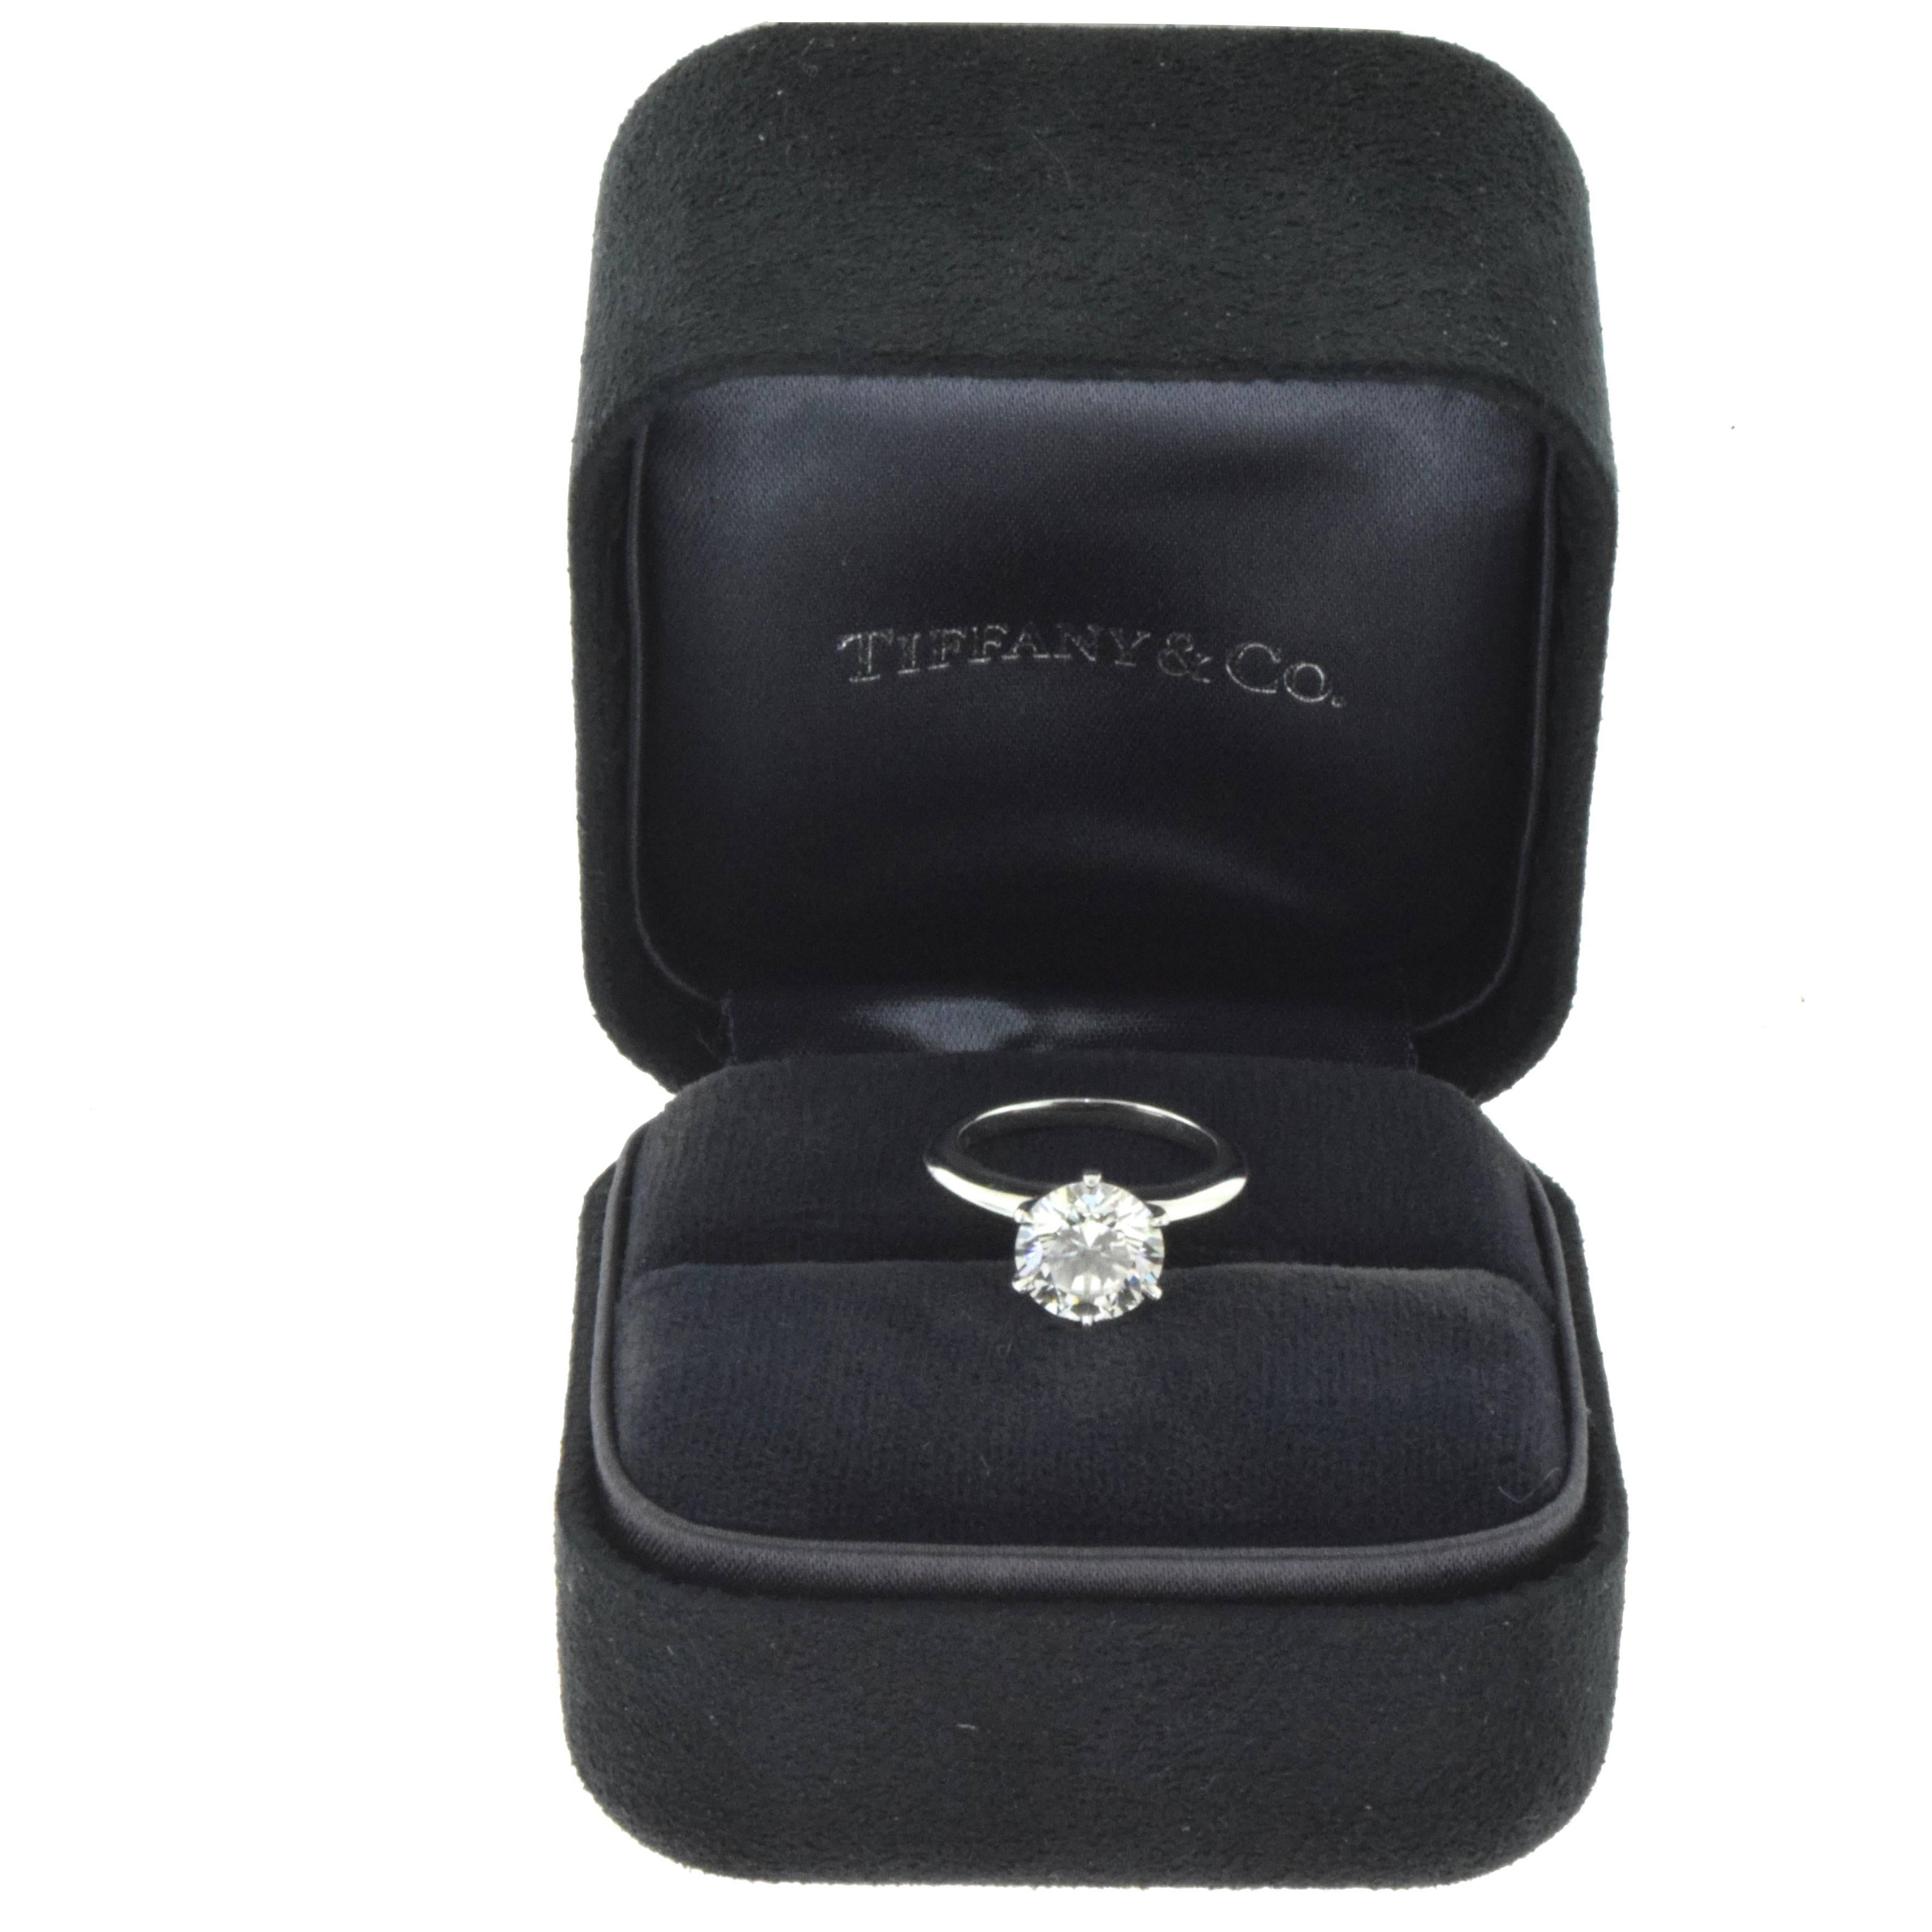 Designer: Tiffany & Co.
Ring Size: 4 (this ring is sizable)
Metal: Platinum
Metal Purity: 950
Stones: Diamond
Diamond Color: F
Diamond Clarity: VS2
Total Carat Weight: 2.19 ct
Hallmark: Tiffany & Co. PT950 Serial Number 2.19ct